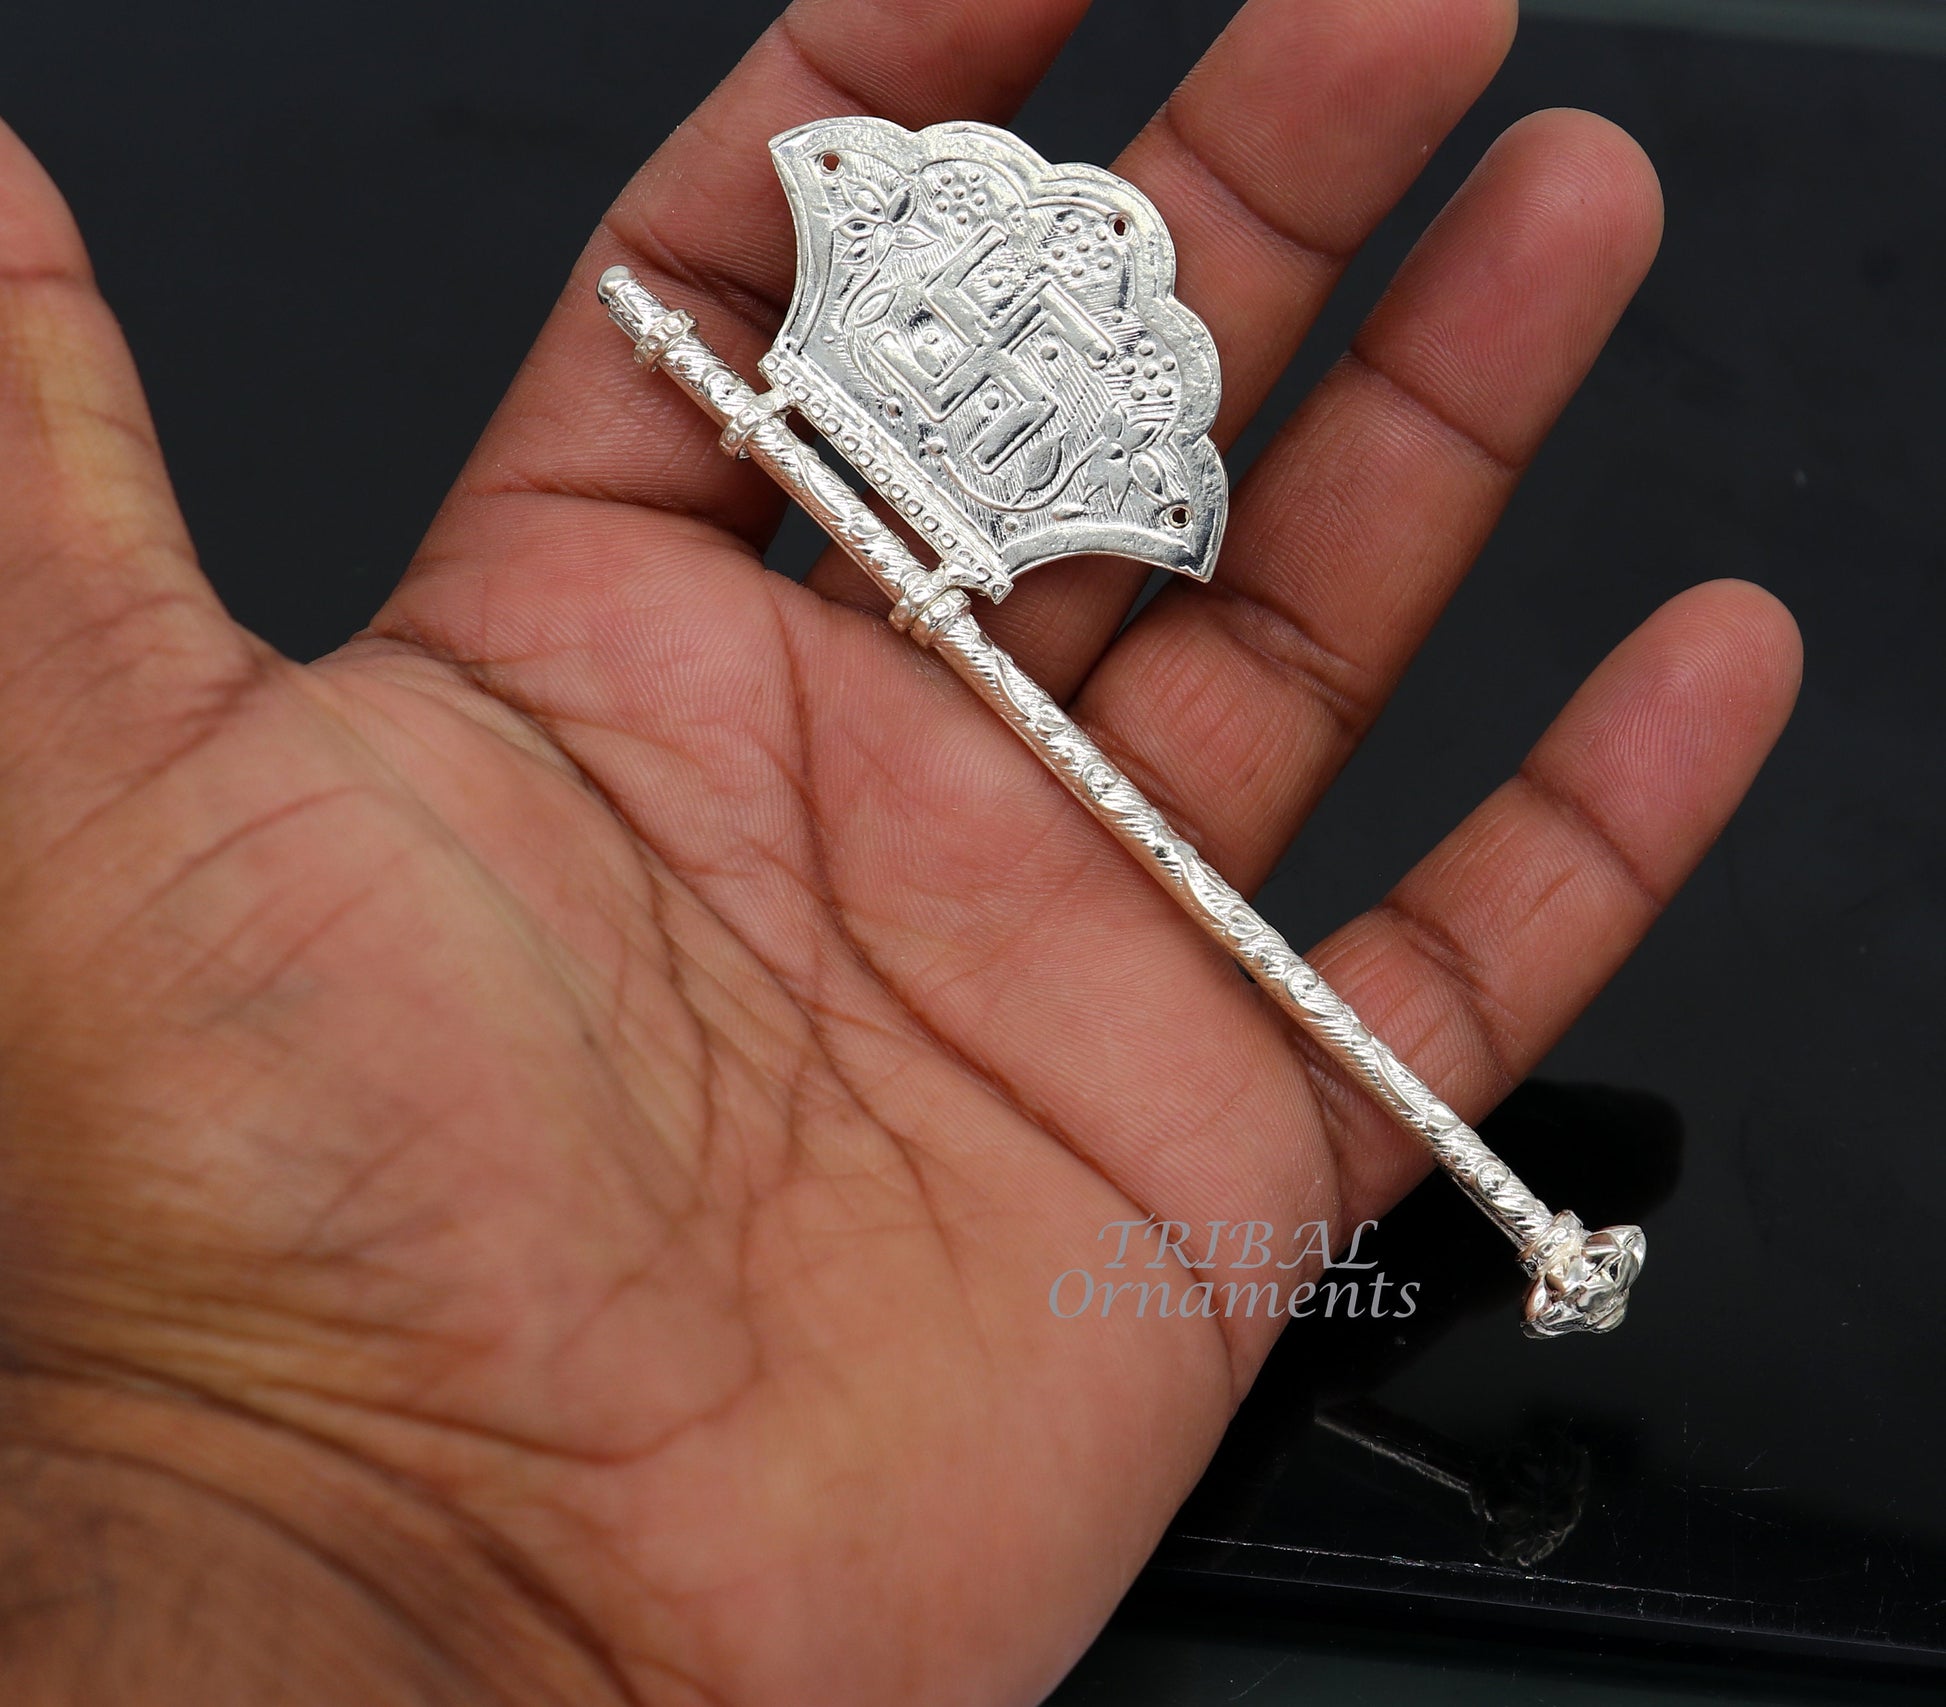 Sterling silver pankhi, floral design small fan or pankhi for god puja, best gifting to laddu gopala krishna, silver hand driven fan su963 - TRIBAL ORNAMENTS